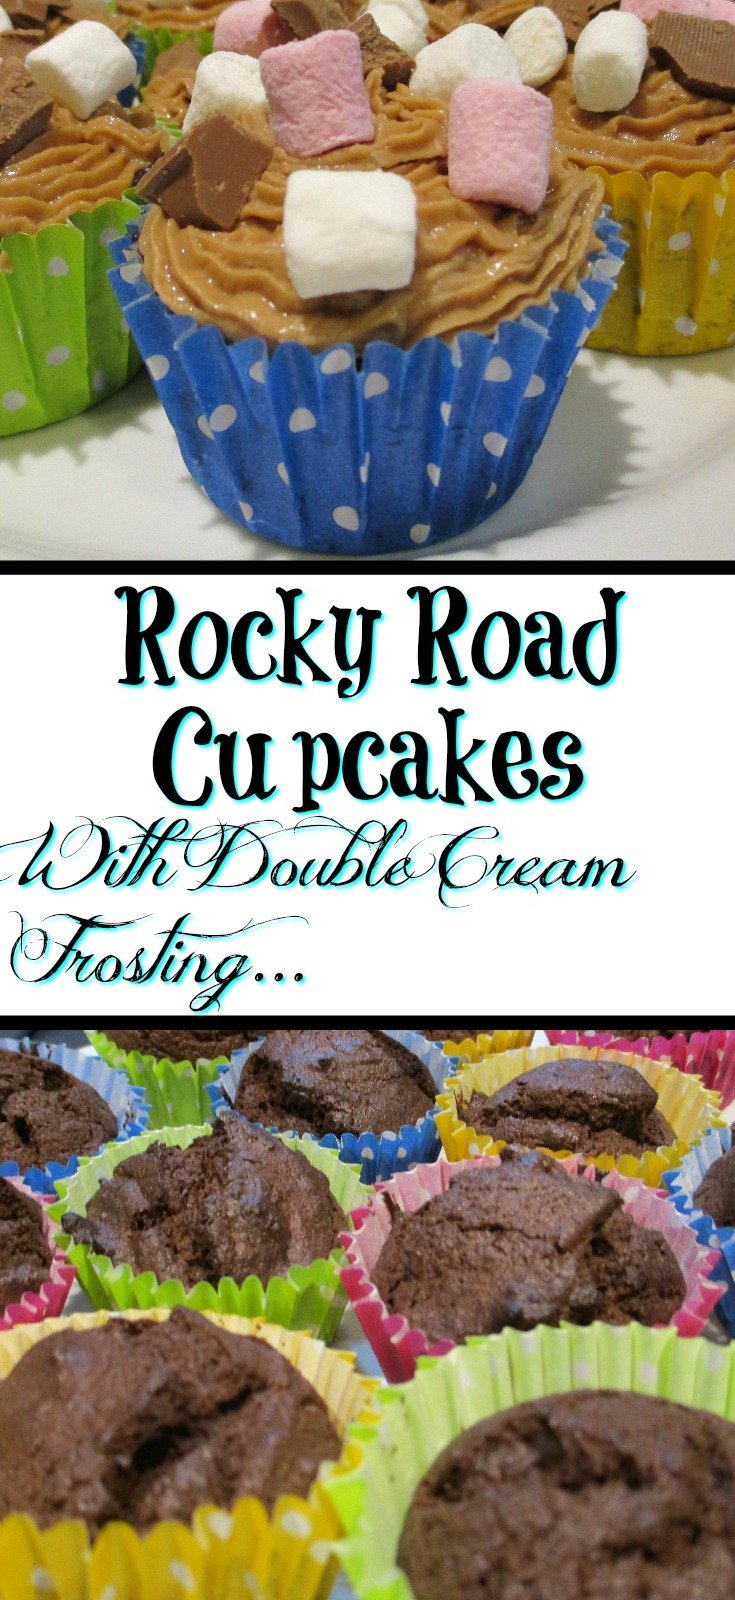 Rocky Road Cupcakes With Double Cream Frosting - Naughty but definitely worth it!